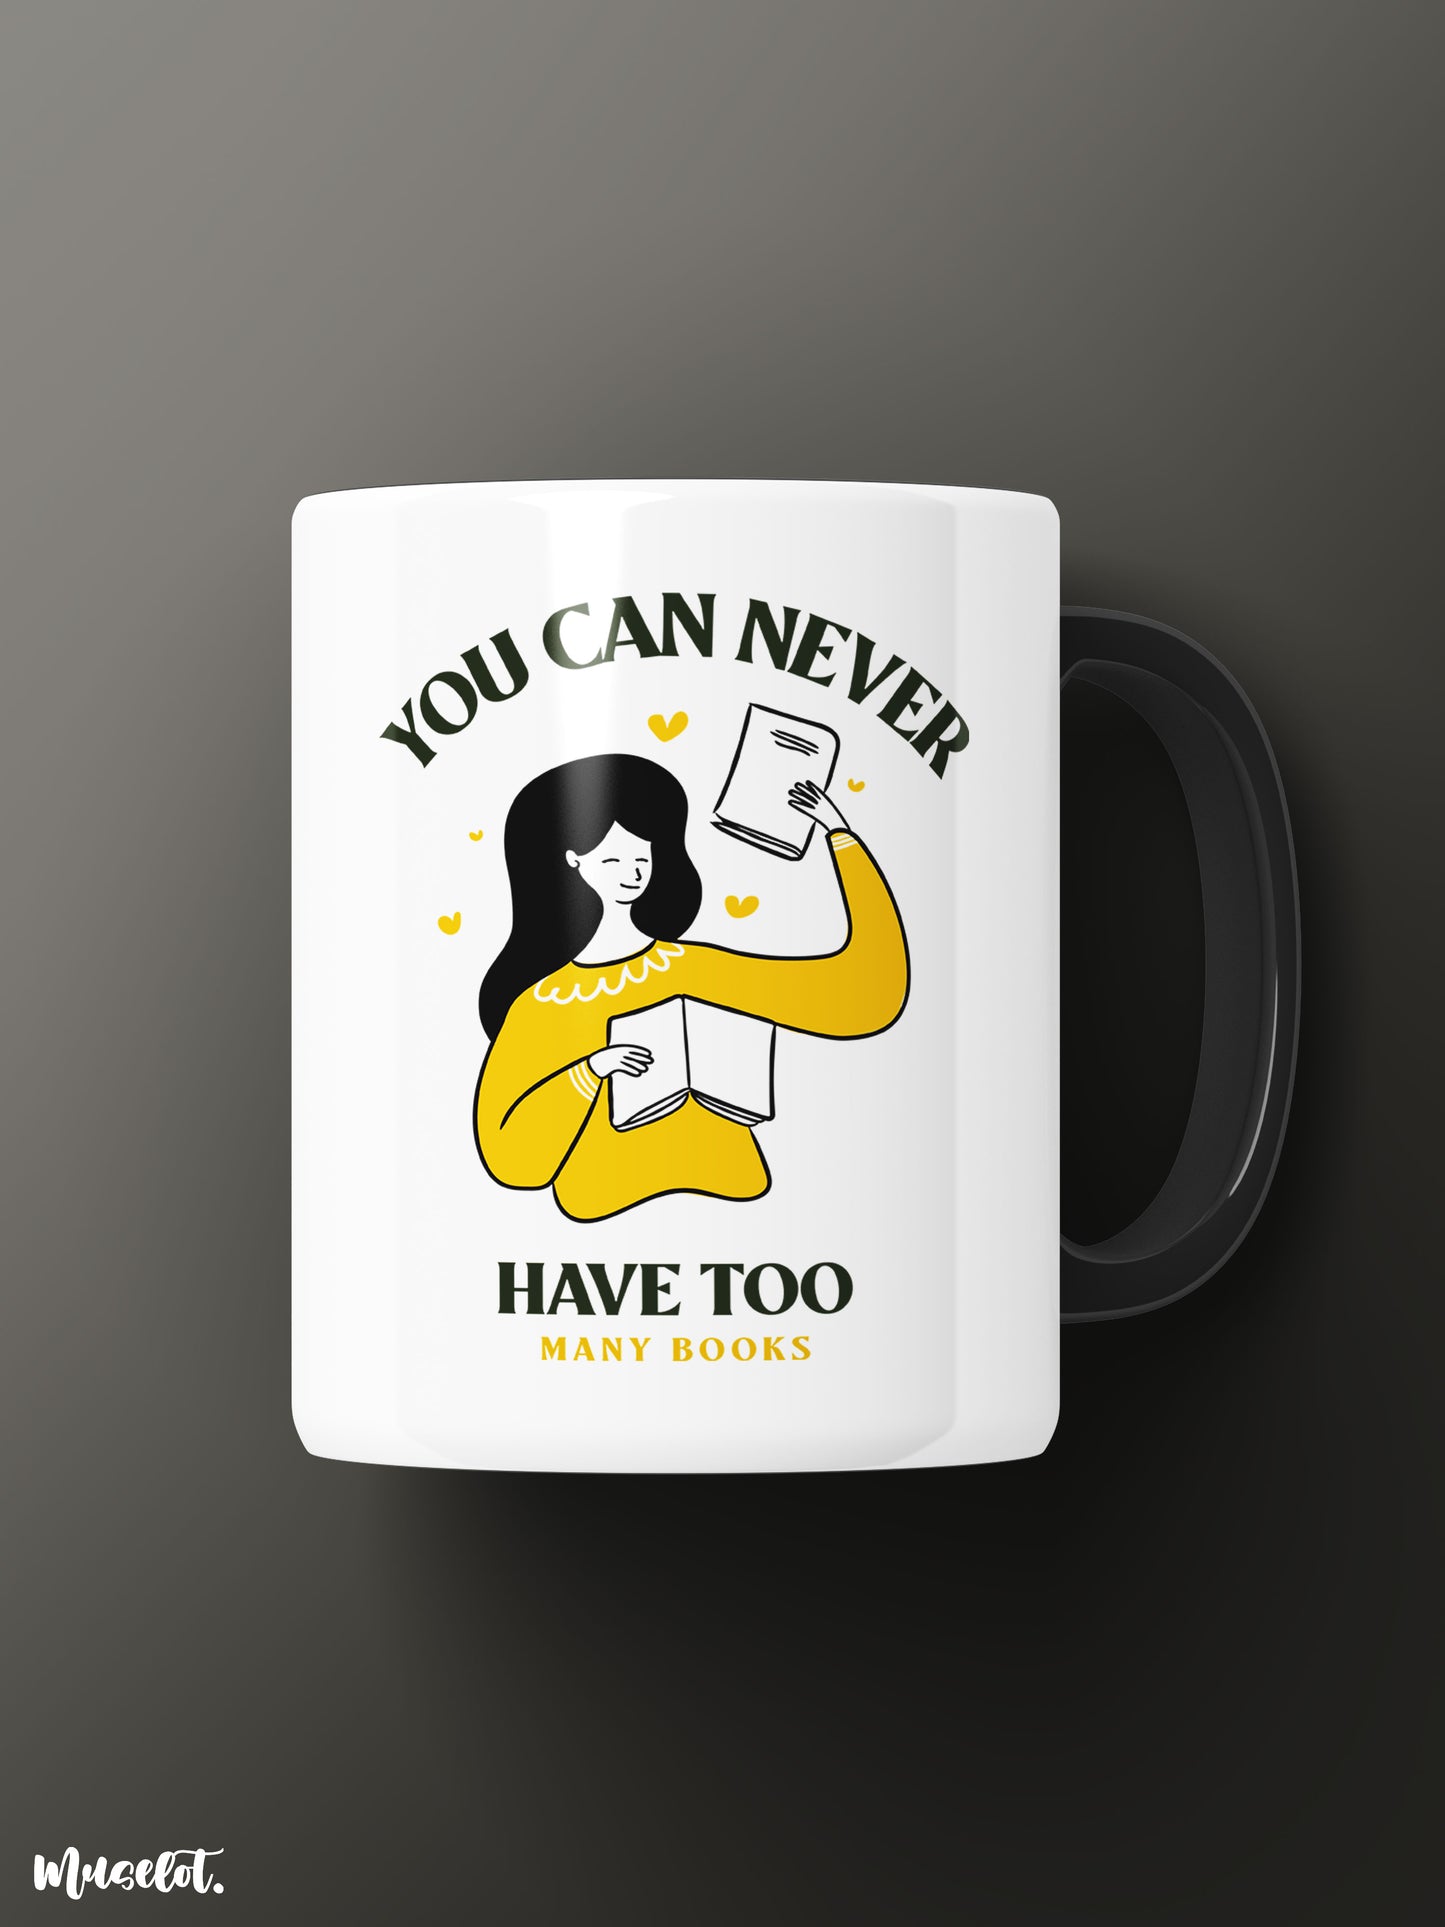 You can never have too many books printed white mugs online - Muselot